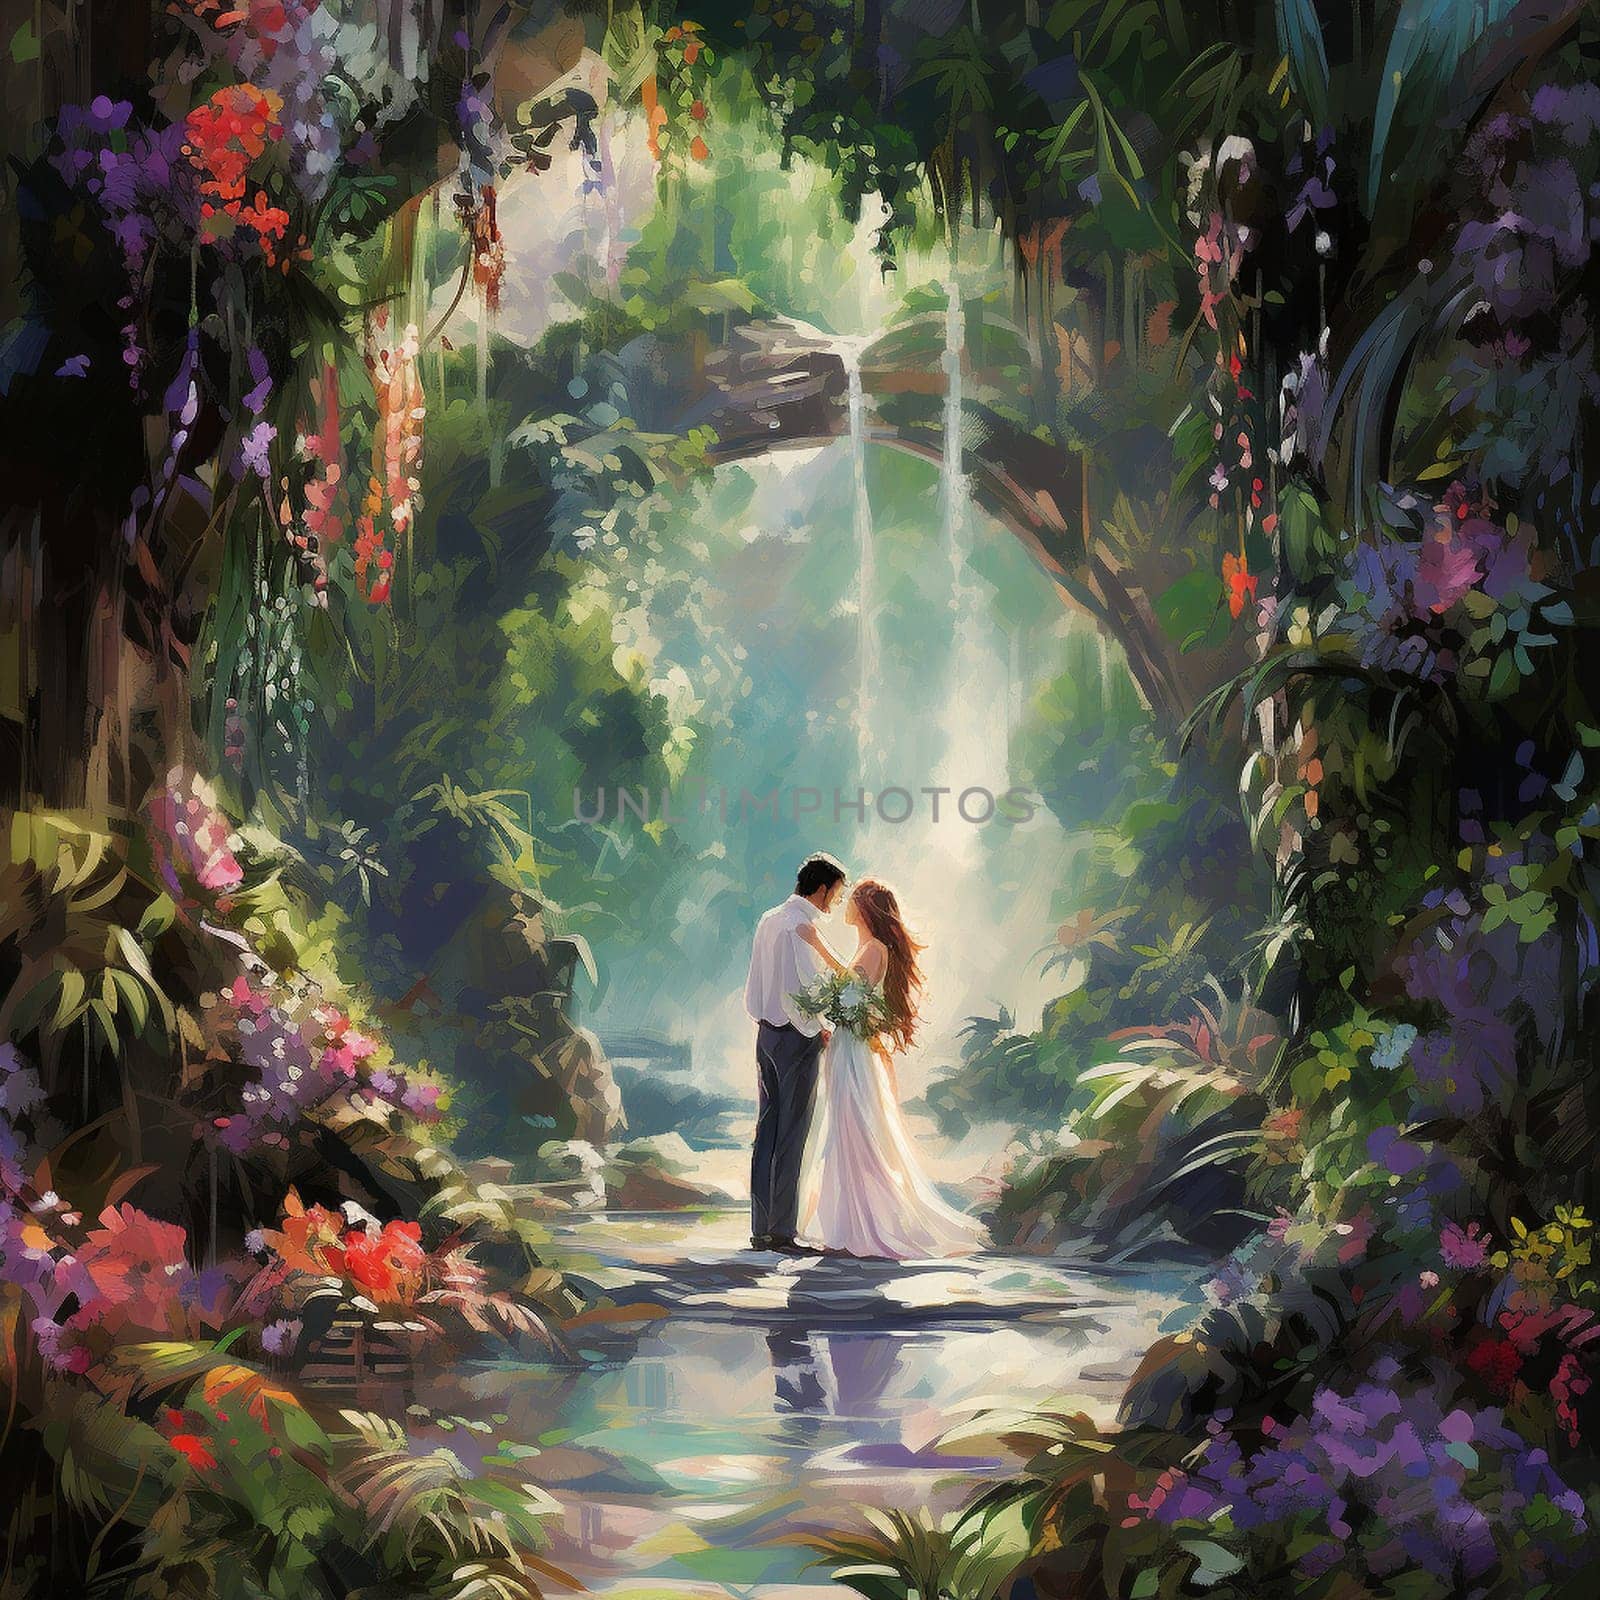 Emerald Oasis: Vows Exchanged in a Verdant Sanctuary by Sahin